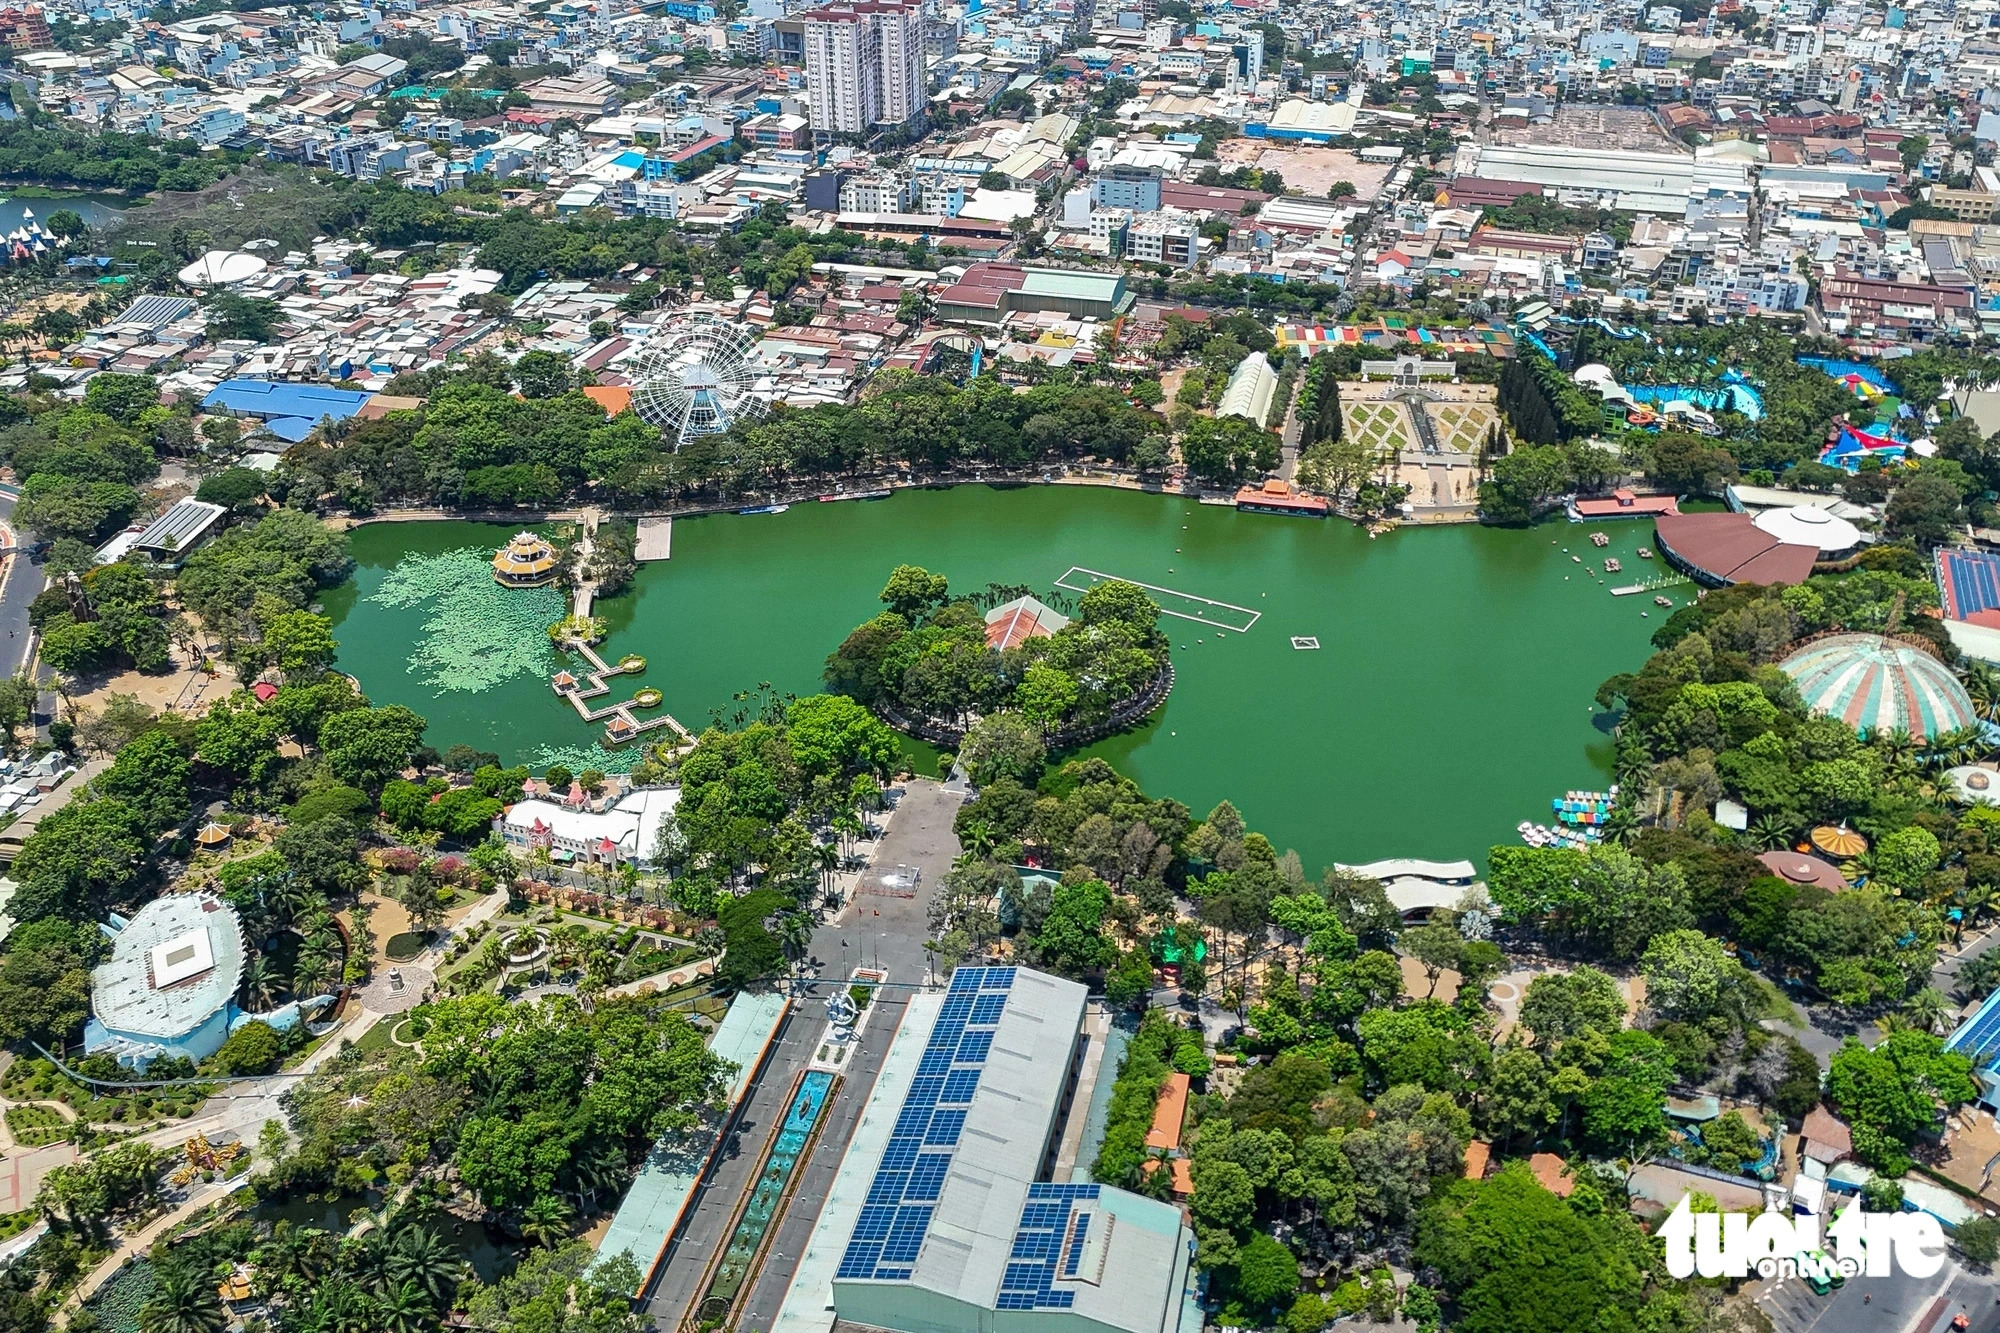 Founded in 1999, the Dam Sen Theme Park spans an area of around three hectares in District 11. The theme park boasts a huge green space and a large number of endangered animals, as well as entertainment services for local people and visitors. Photo: Phuong Quyen / Tuoi Tre